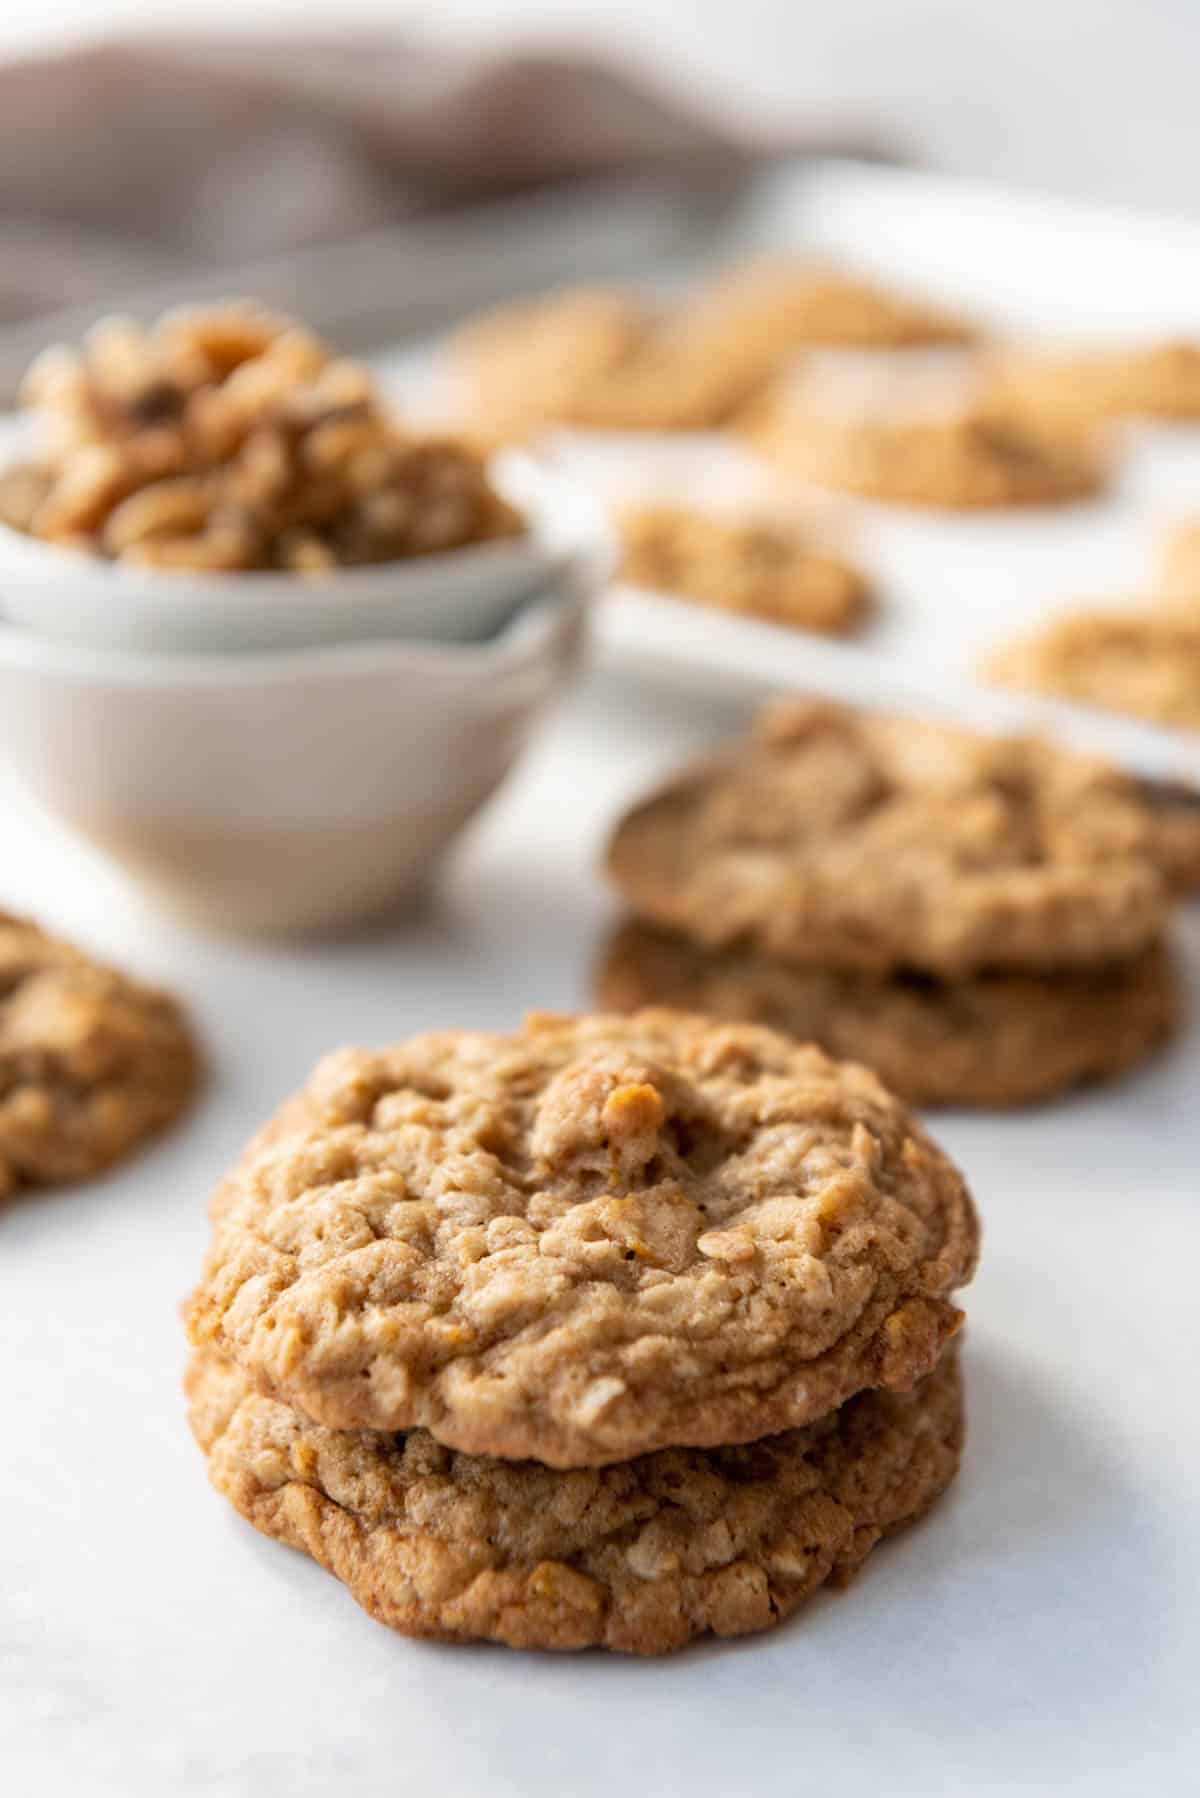 Old-fashioned ranger cookies in a stack in front of a bowl of walnuts.